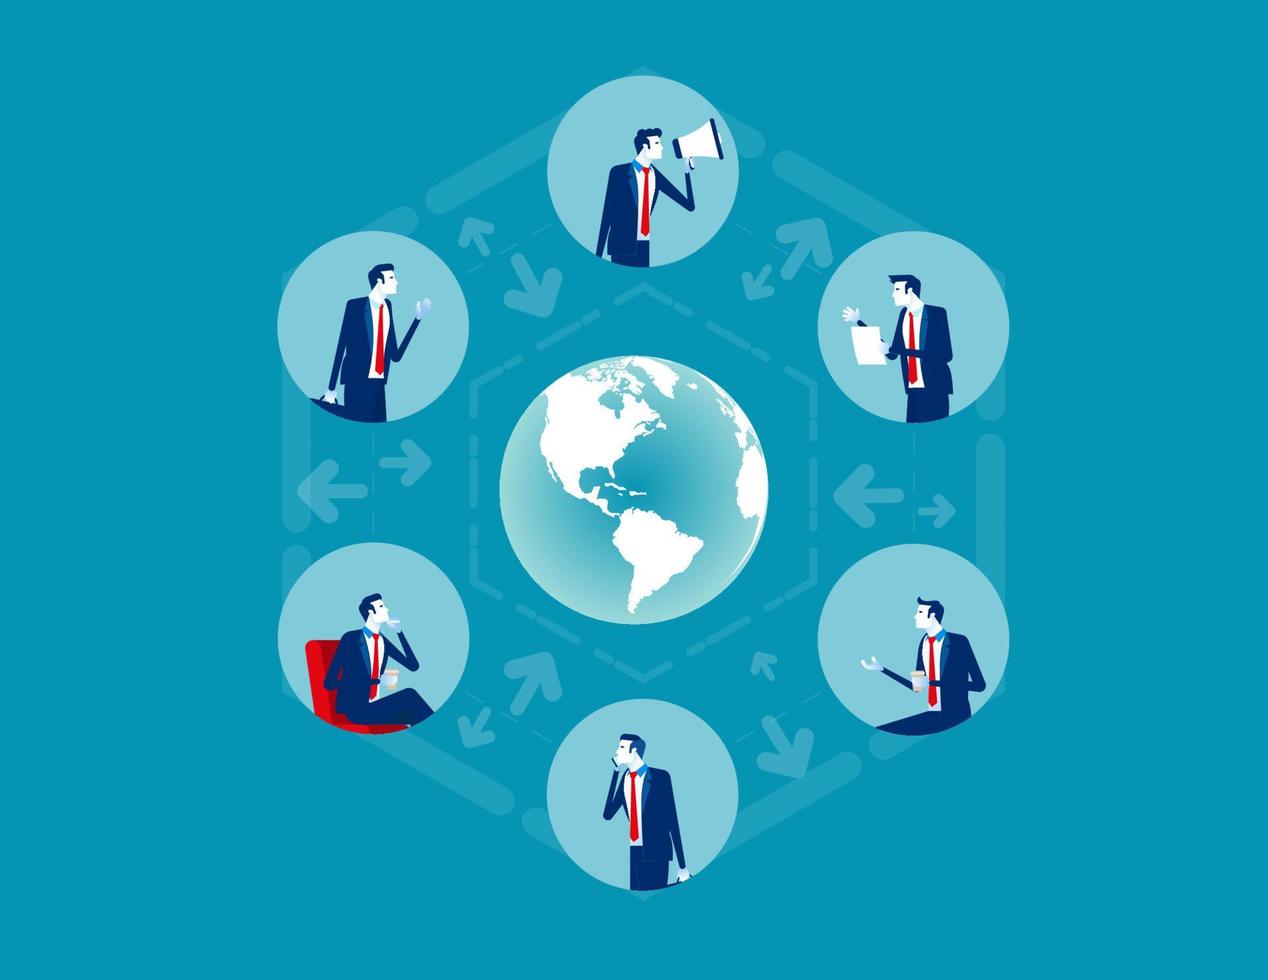 Business people communicate team. Concept business global network vector illustration